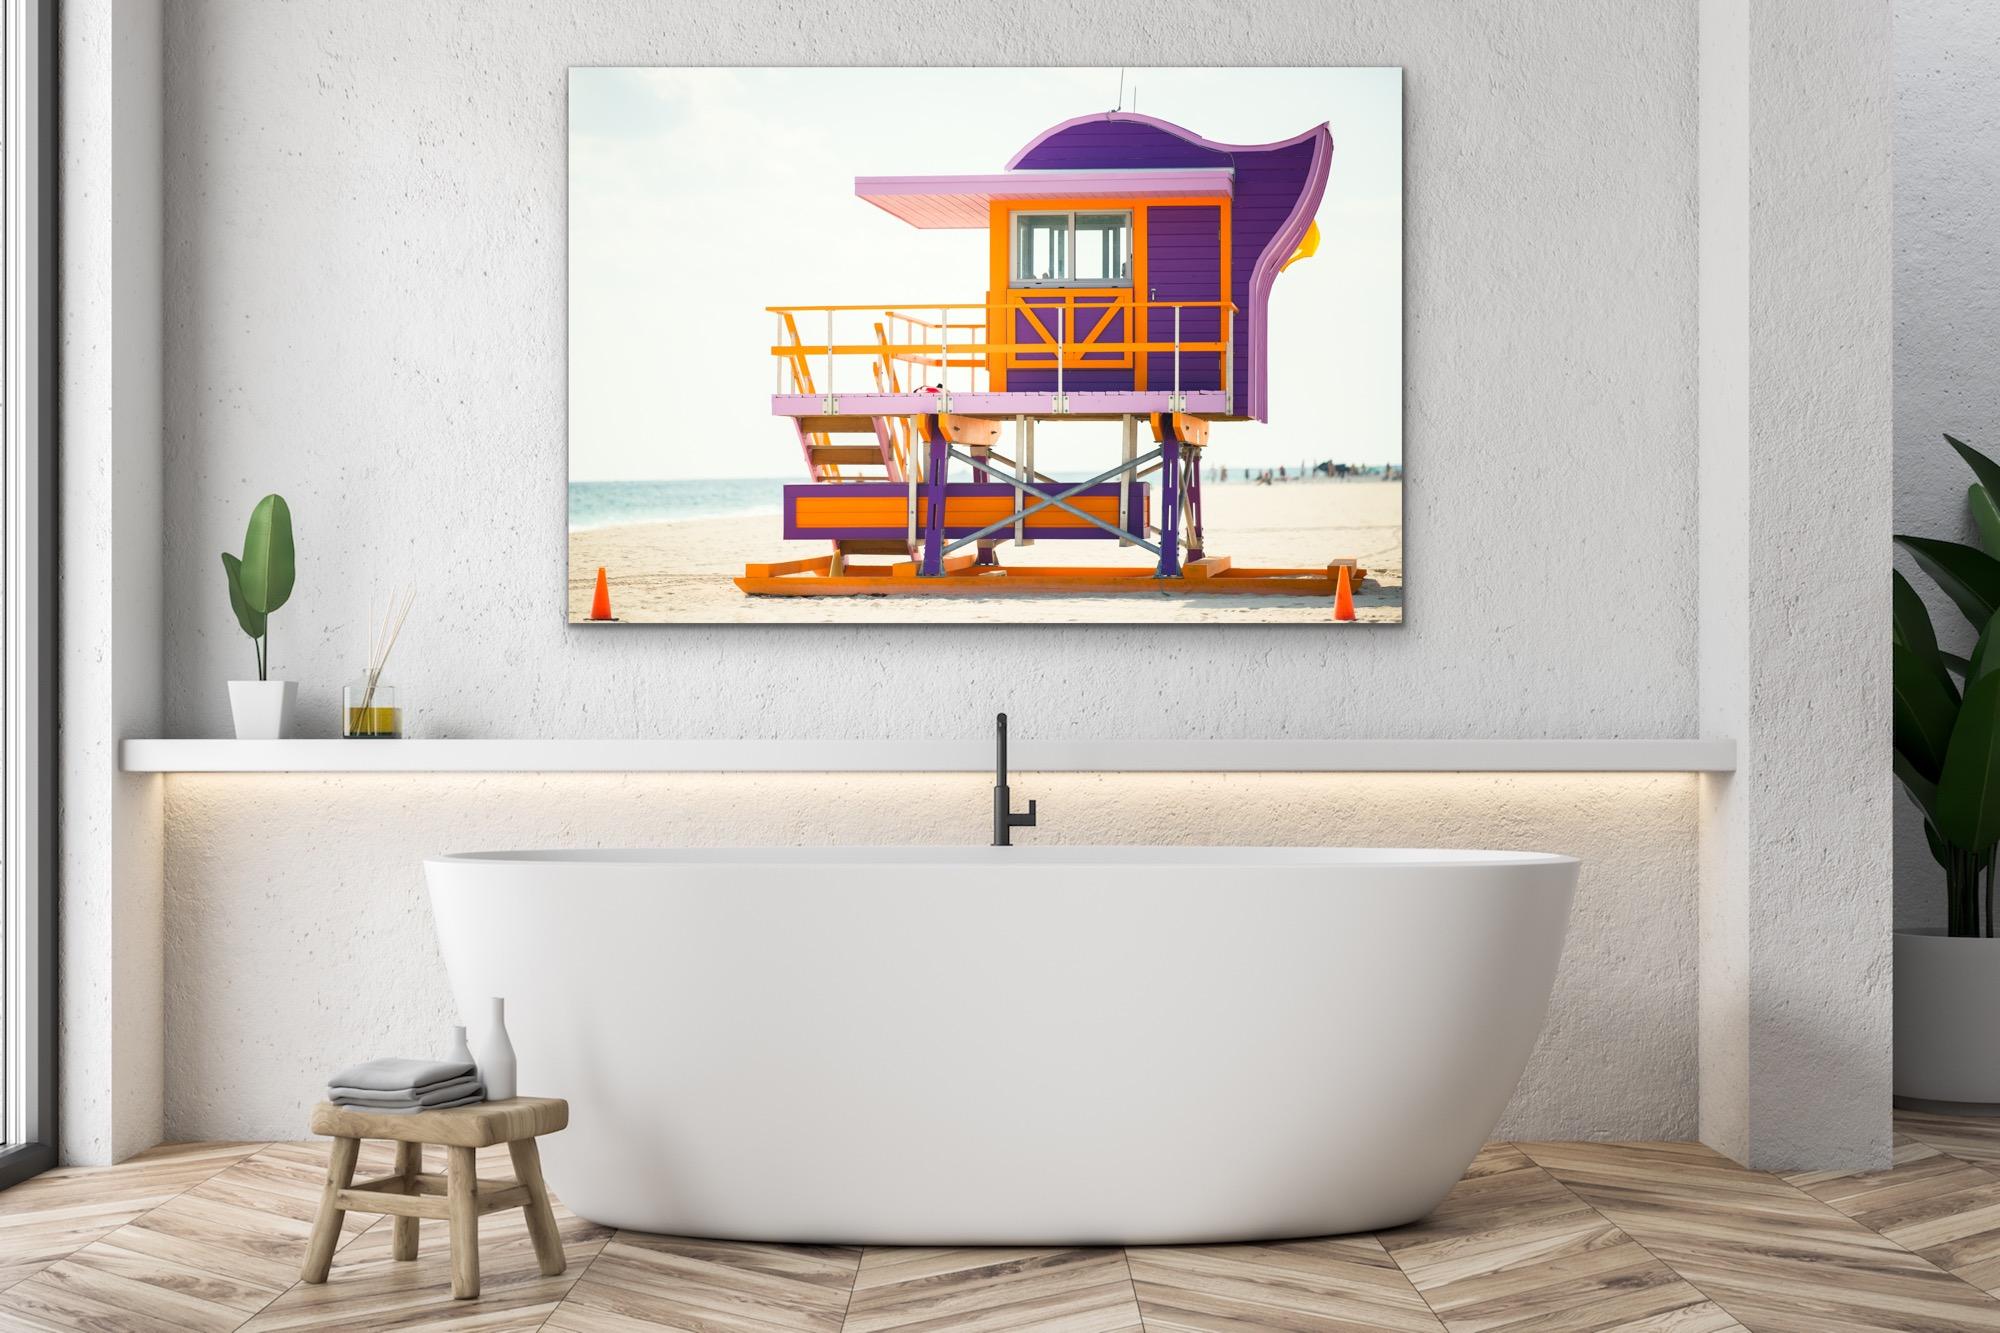 This contemporary coastal photograph by Peter Mendelson depicts a side view of a bright violet, pink, and orange Miami lifeguard stand on the beach. A light blue ocean can be seen behind the stand, with a light, neutral blue sky above it.